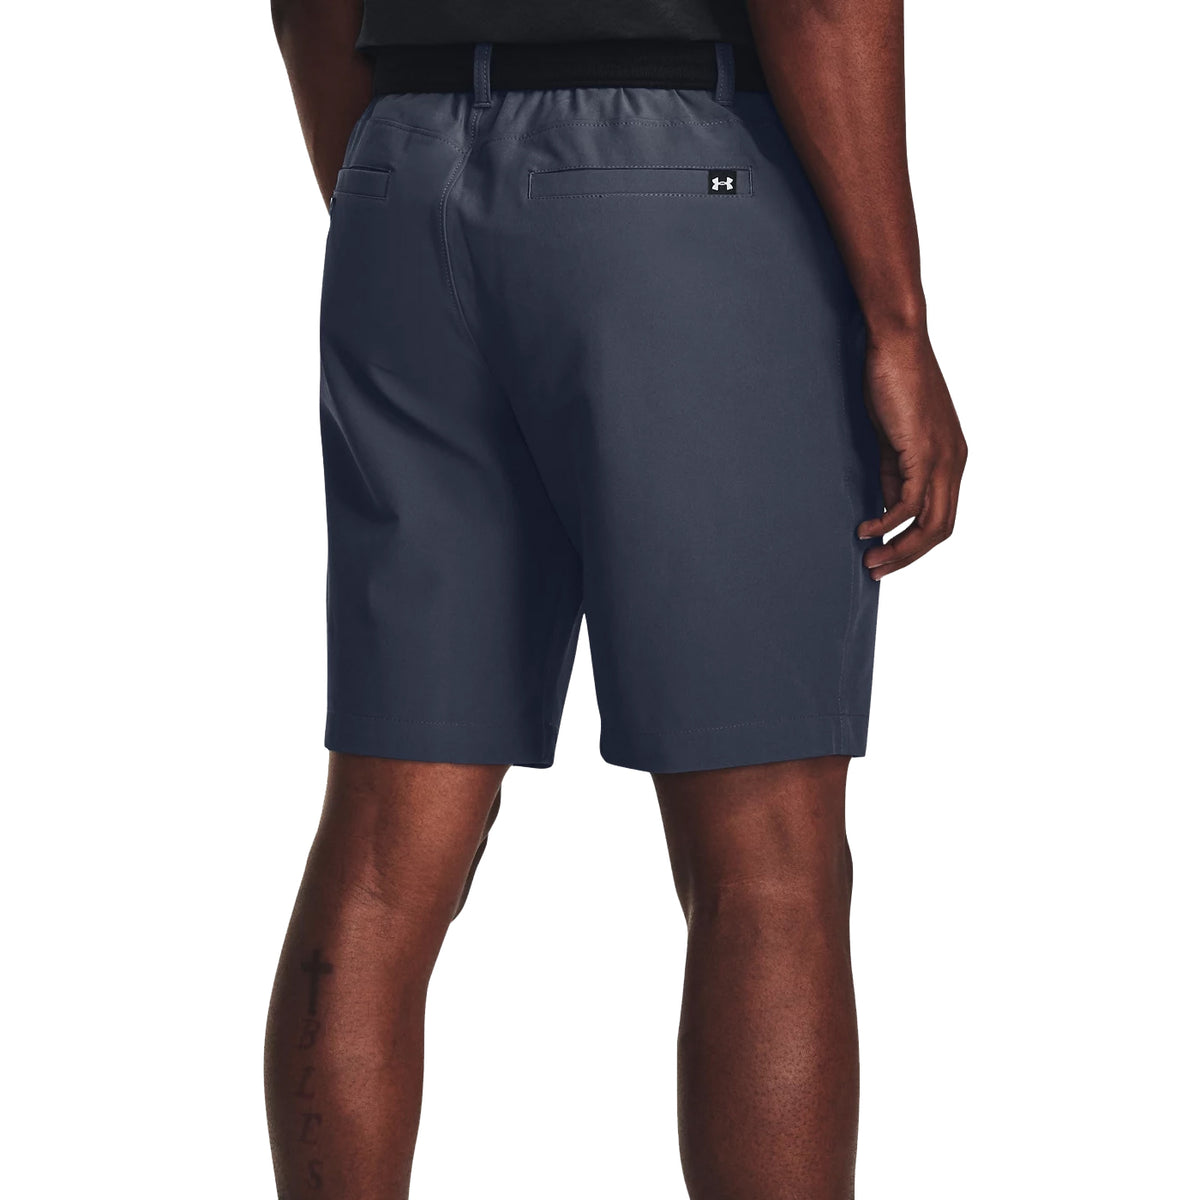 Under Armour Drive Golf Shorts - Downpour Grey/Halo Grey